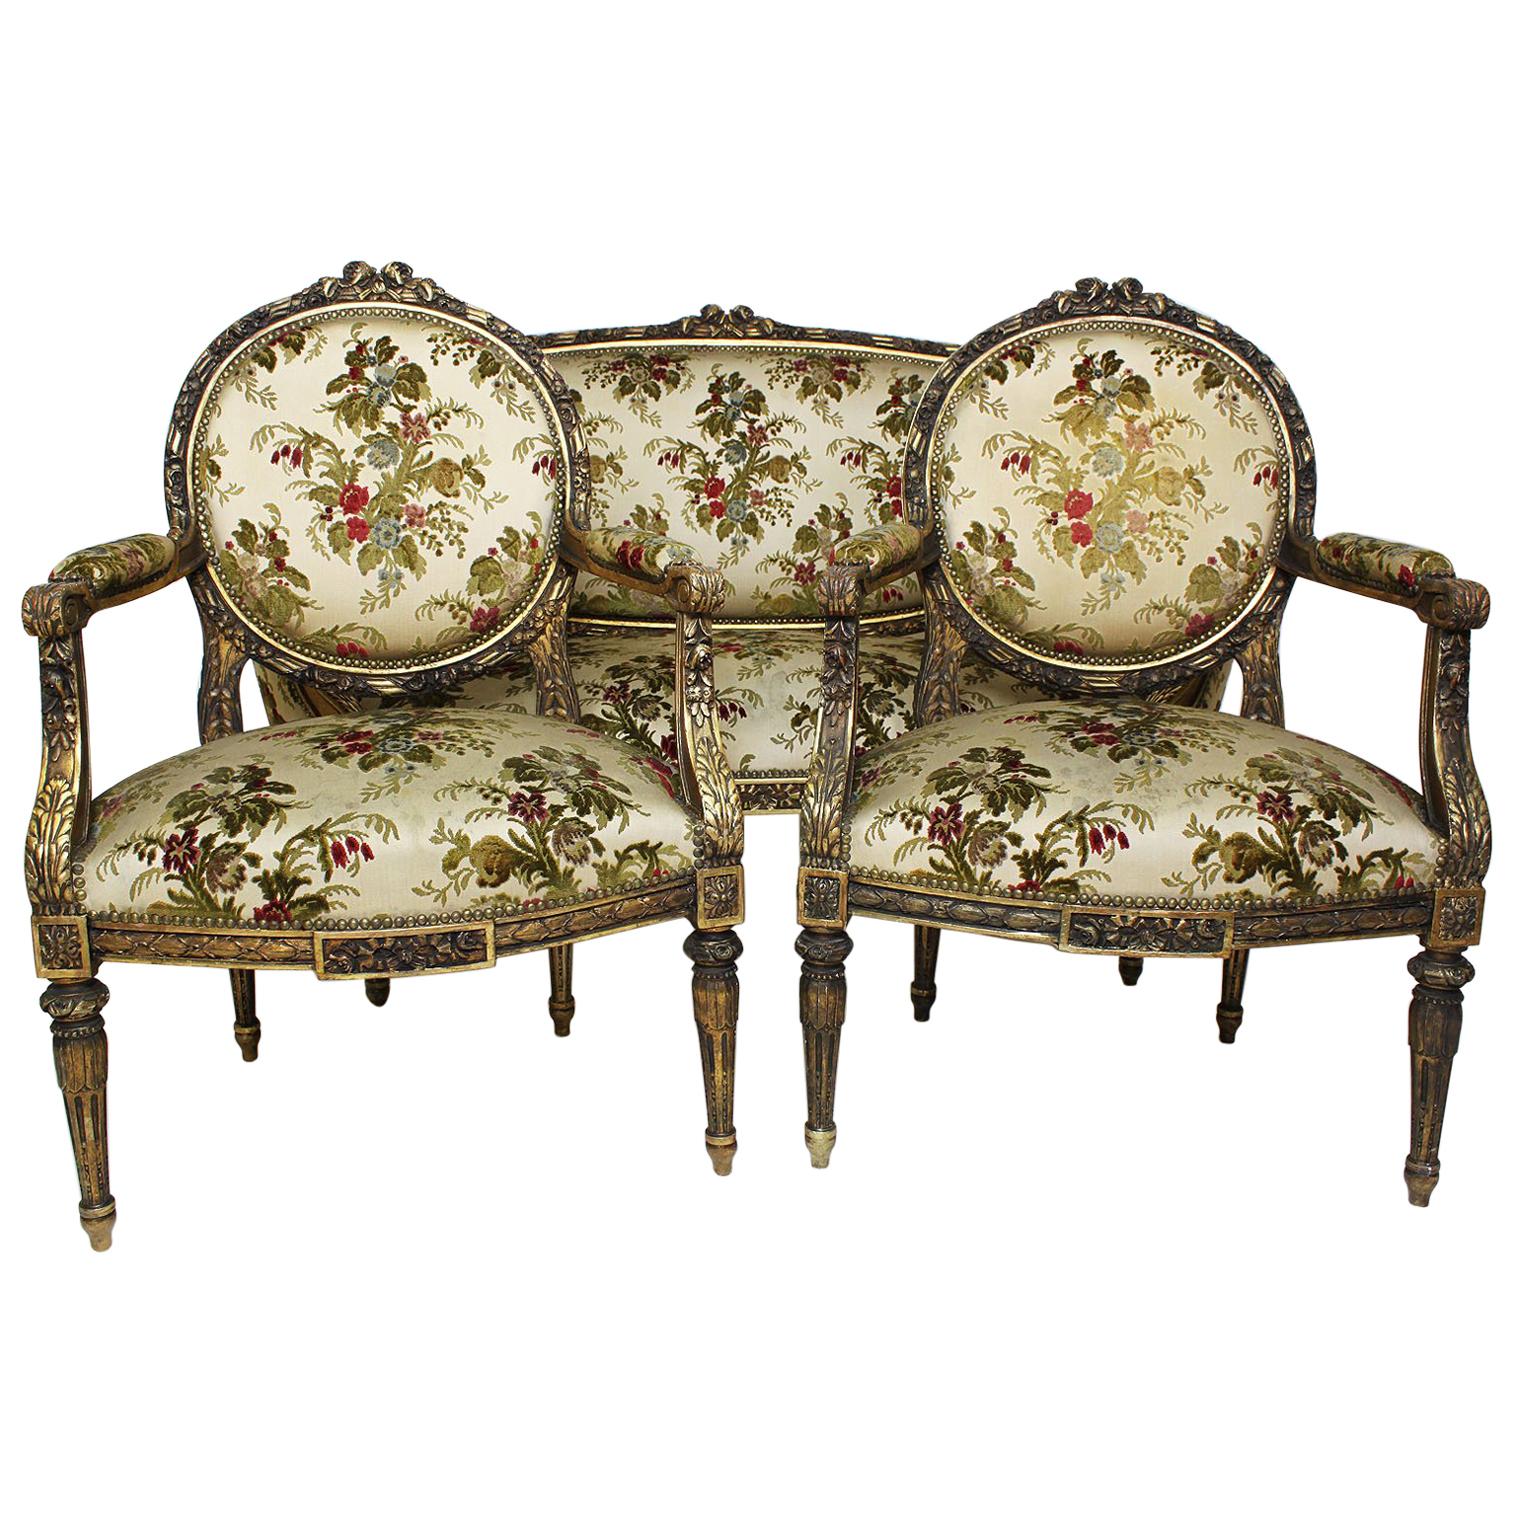 French 19th-20th Century Louis XVI Style Giltwood Carved 3-Piece Salon Suite